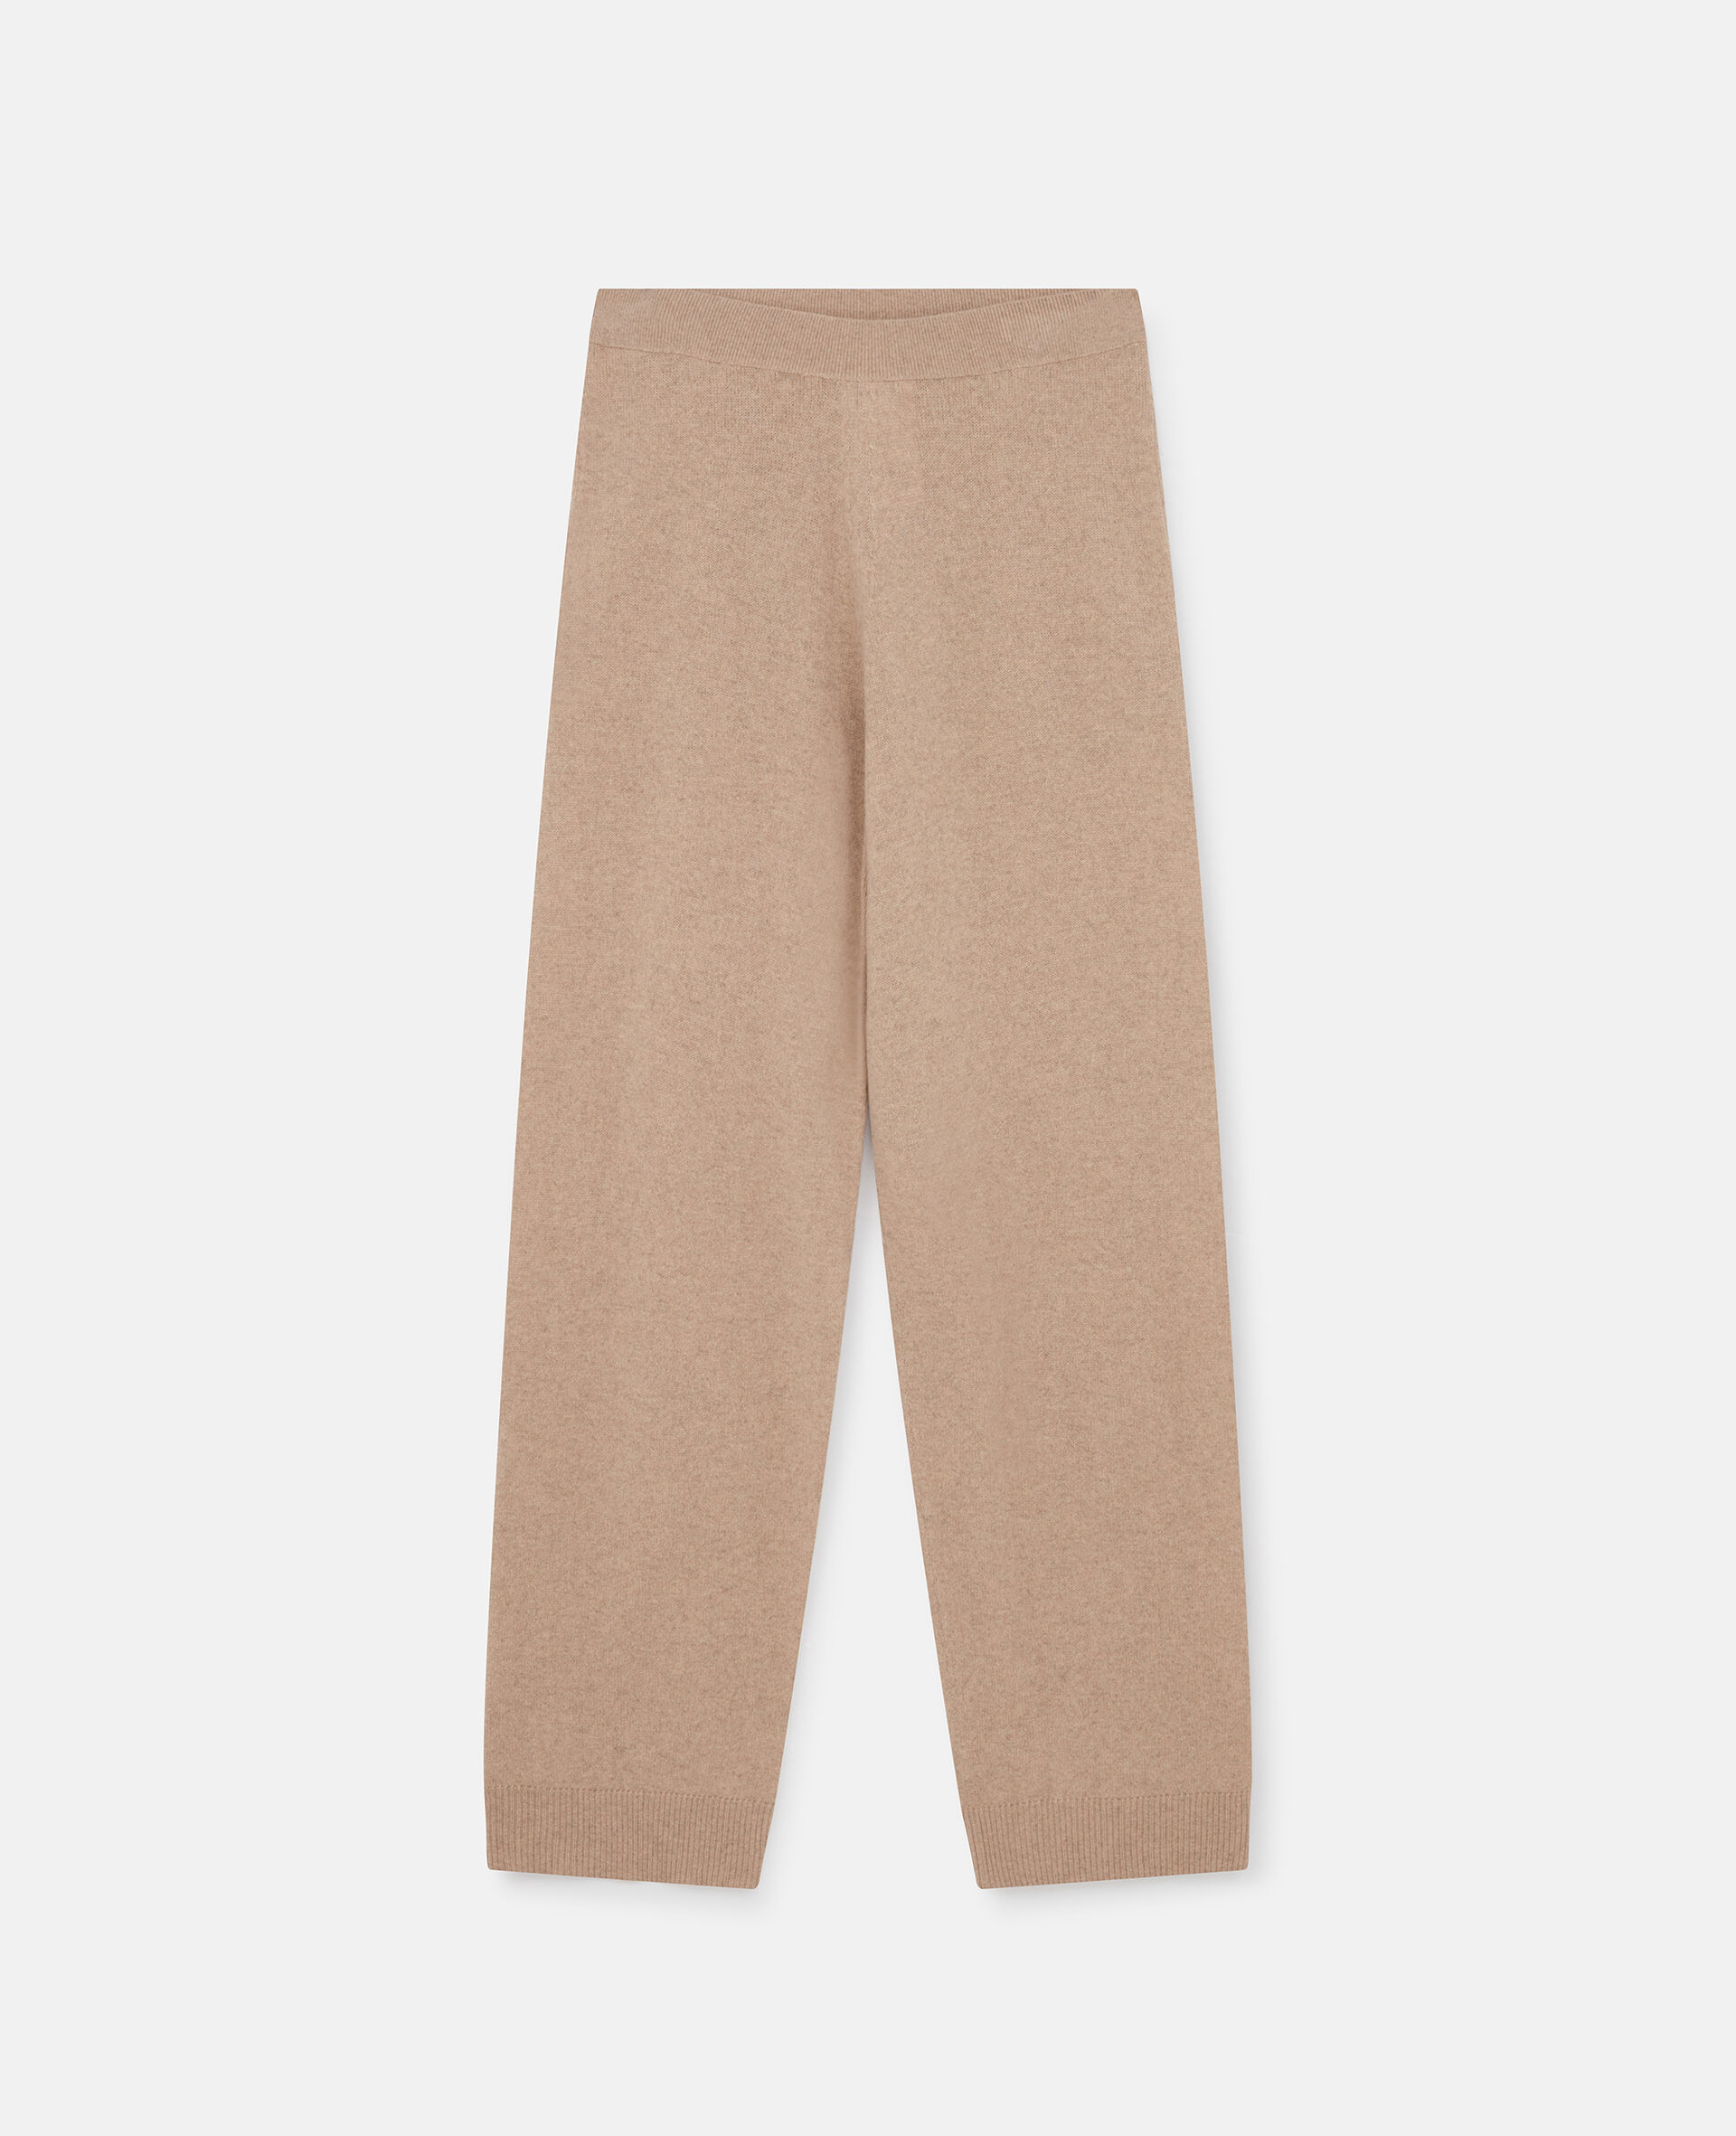 Gerade Hose mit hoher Taille-Beige-large image number 0